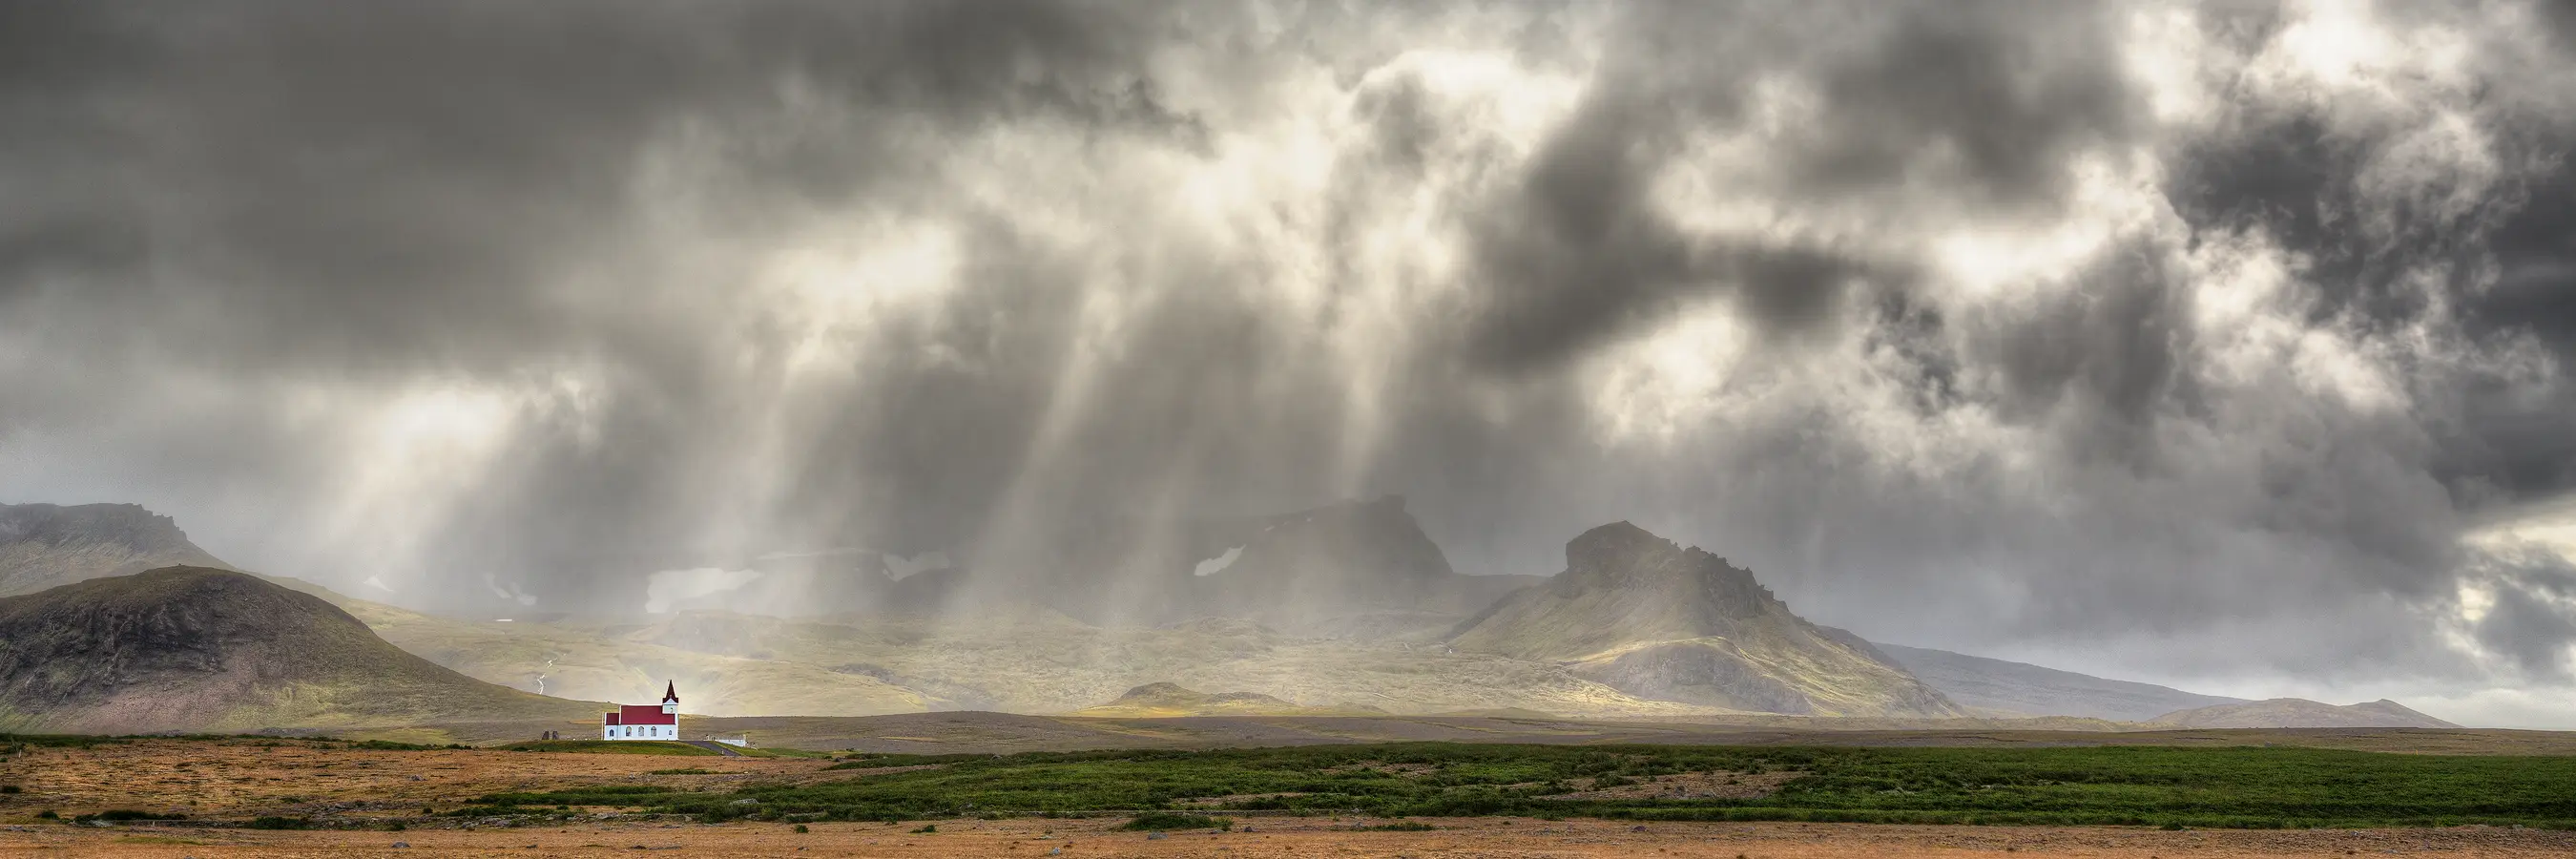 Storm clouds still roil, but gaps open and shafts of sunlight streak through the turbulent sky. Below, in the bottom third of this panorama is a vast plain in front with background mountains disappearing into the clouds. On the left side of the image, a white church with a red roof sits at distance, facing right, to the west, as is the custom in Iceland. It's alone, on the otherwise empty plain.